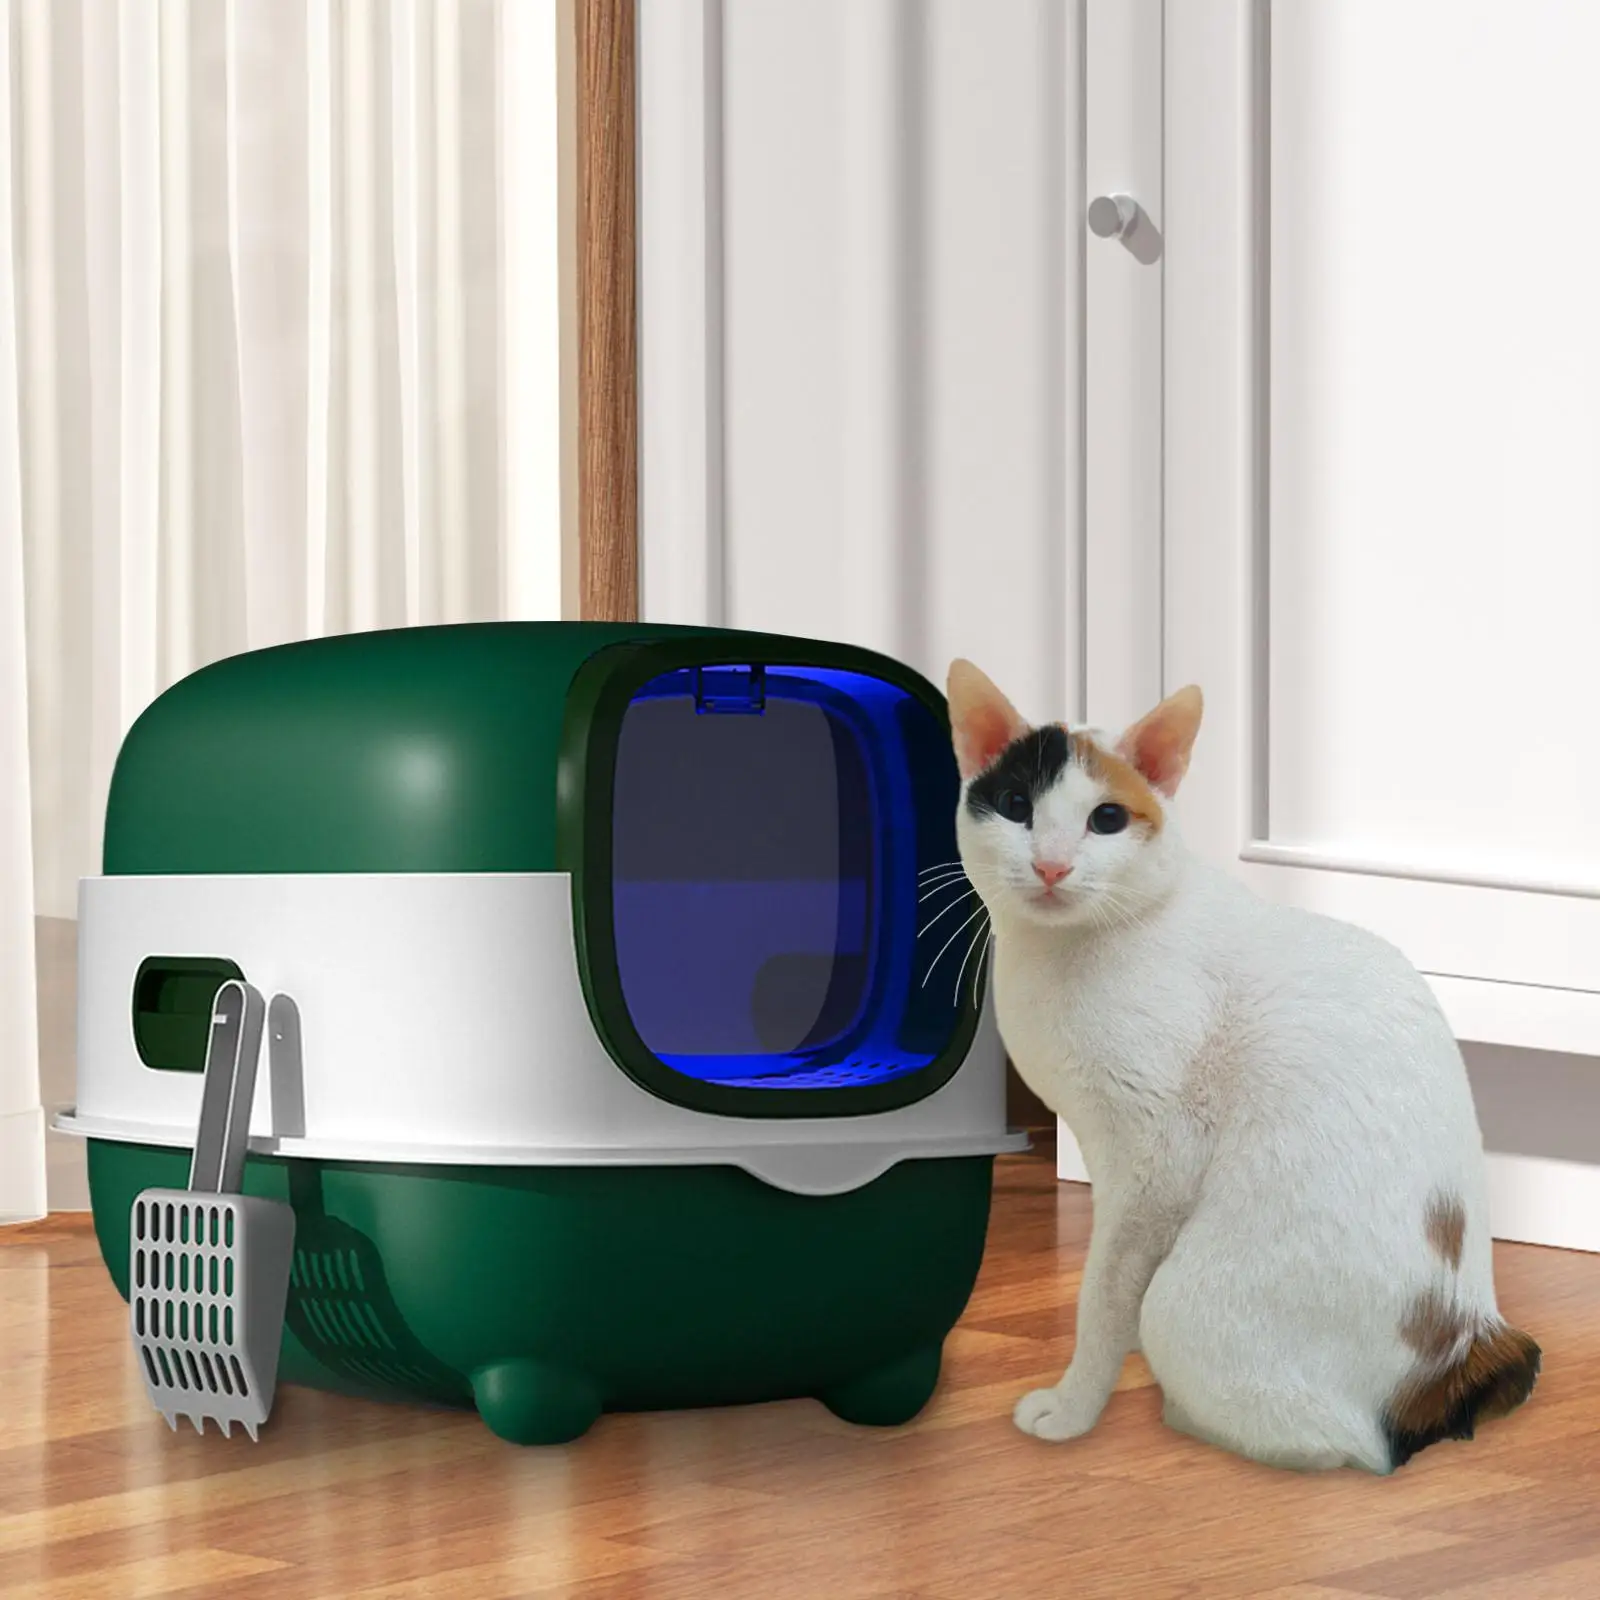 Hooded Cat Litter Box with Front Door Detachable for Small Cats Enclosed Cat Toilet Pet Litter Box Large Enclosed Cat Litter Box